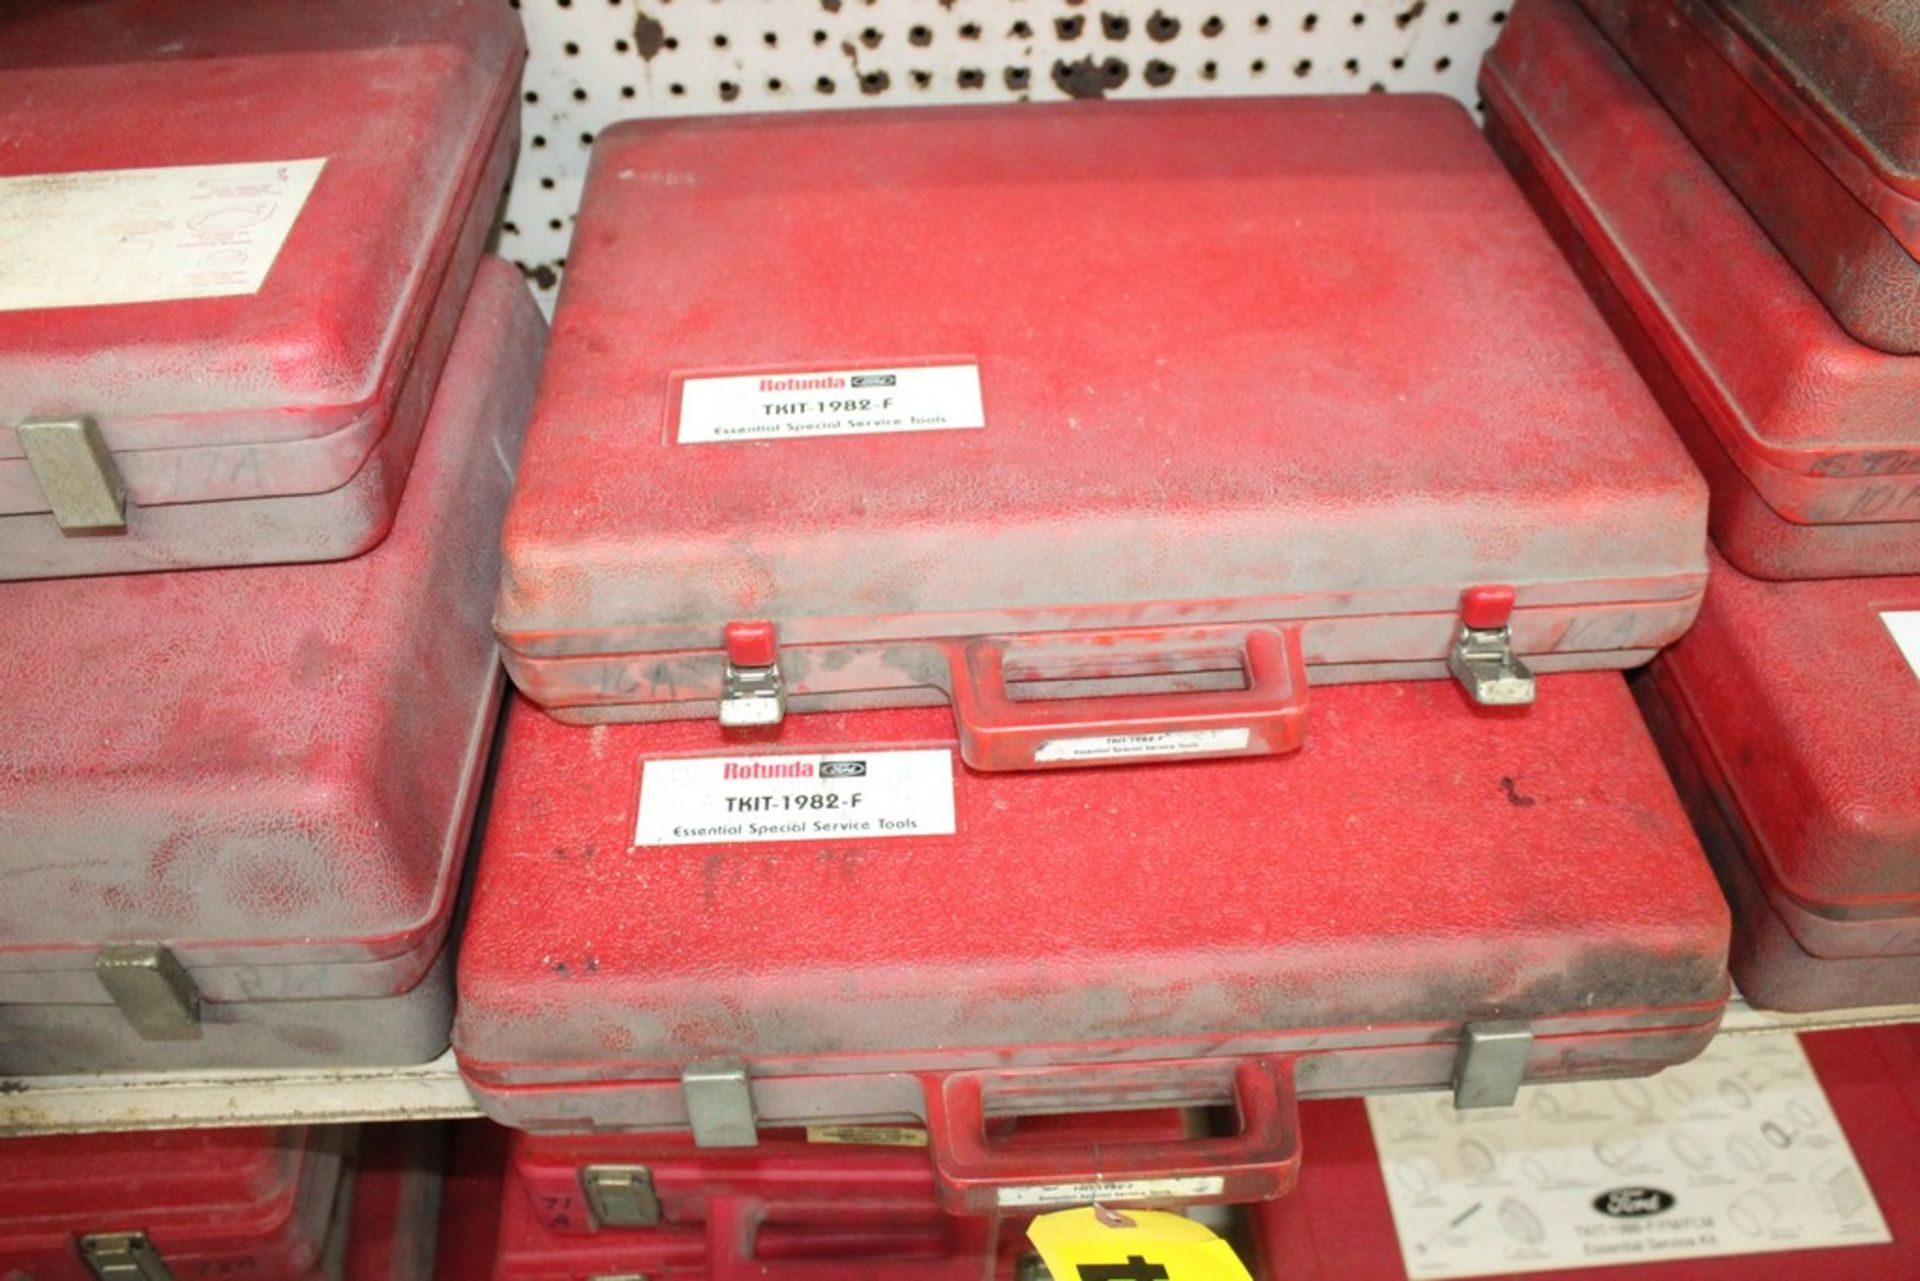 ASSORTED 1982 FORD ROTUNDA ESSENTIAL SERVICE TOOL SETS IN TWO CASES - Image 2 of 4